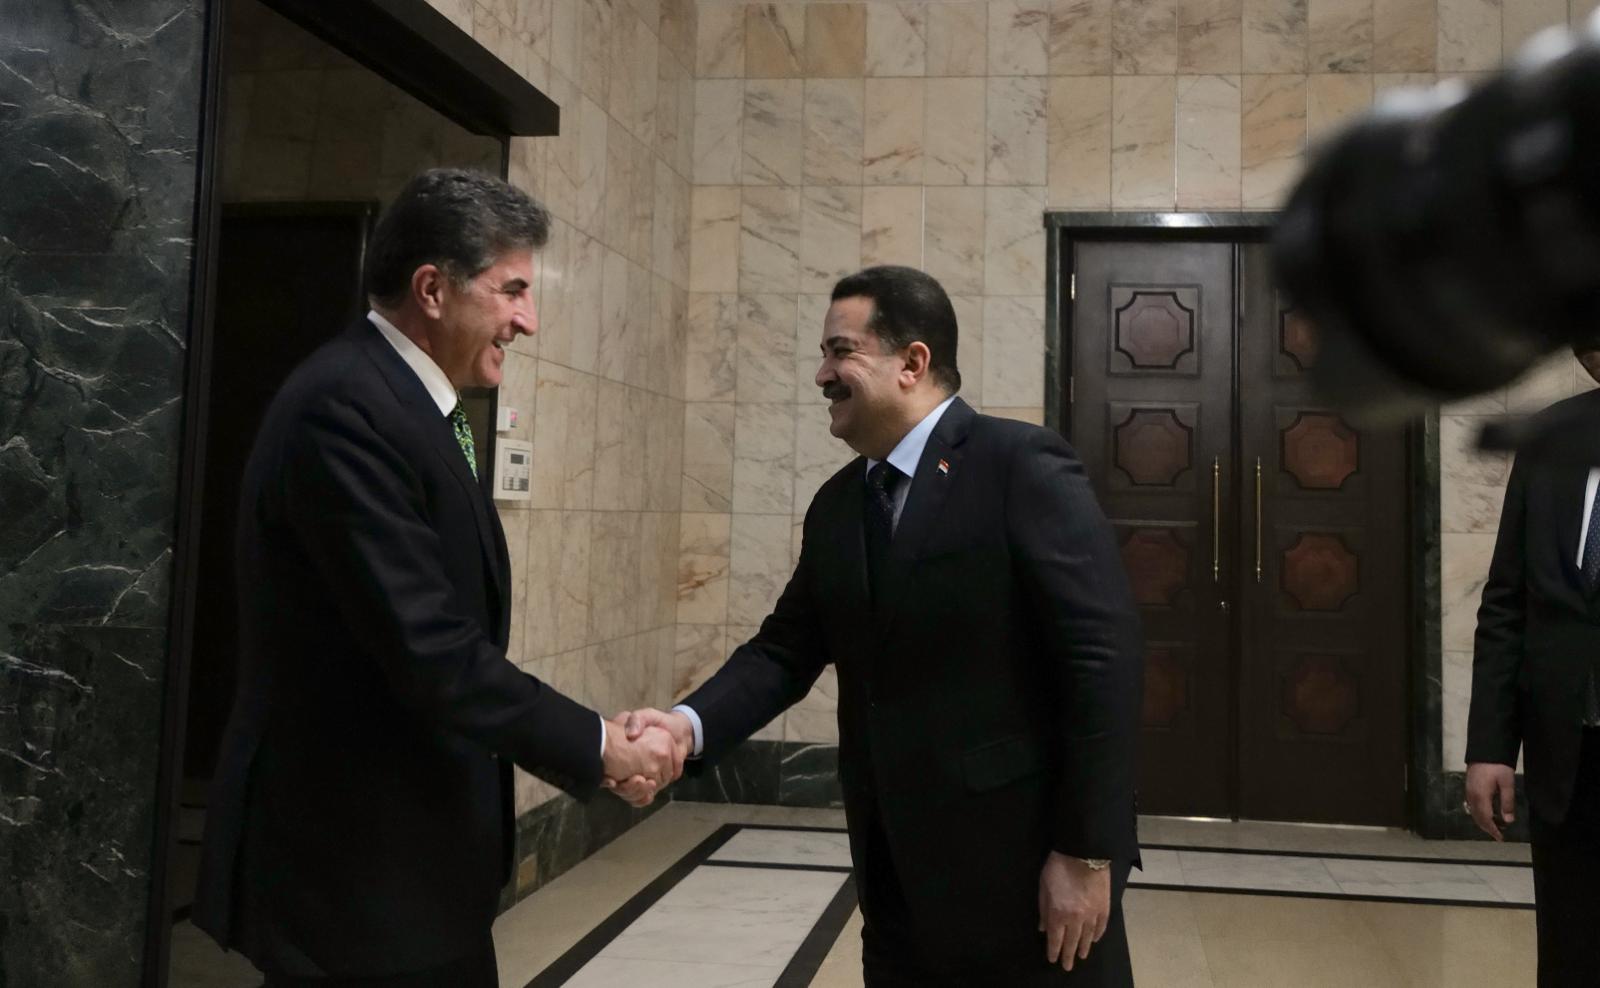 With the "success" of Baghdad's mission. Attention turns to Nechirvan Barzani to defuse crisis